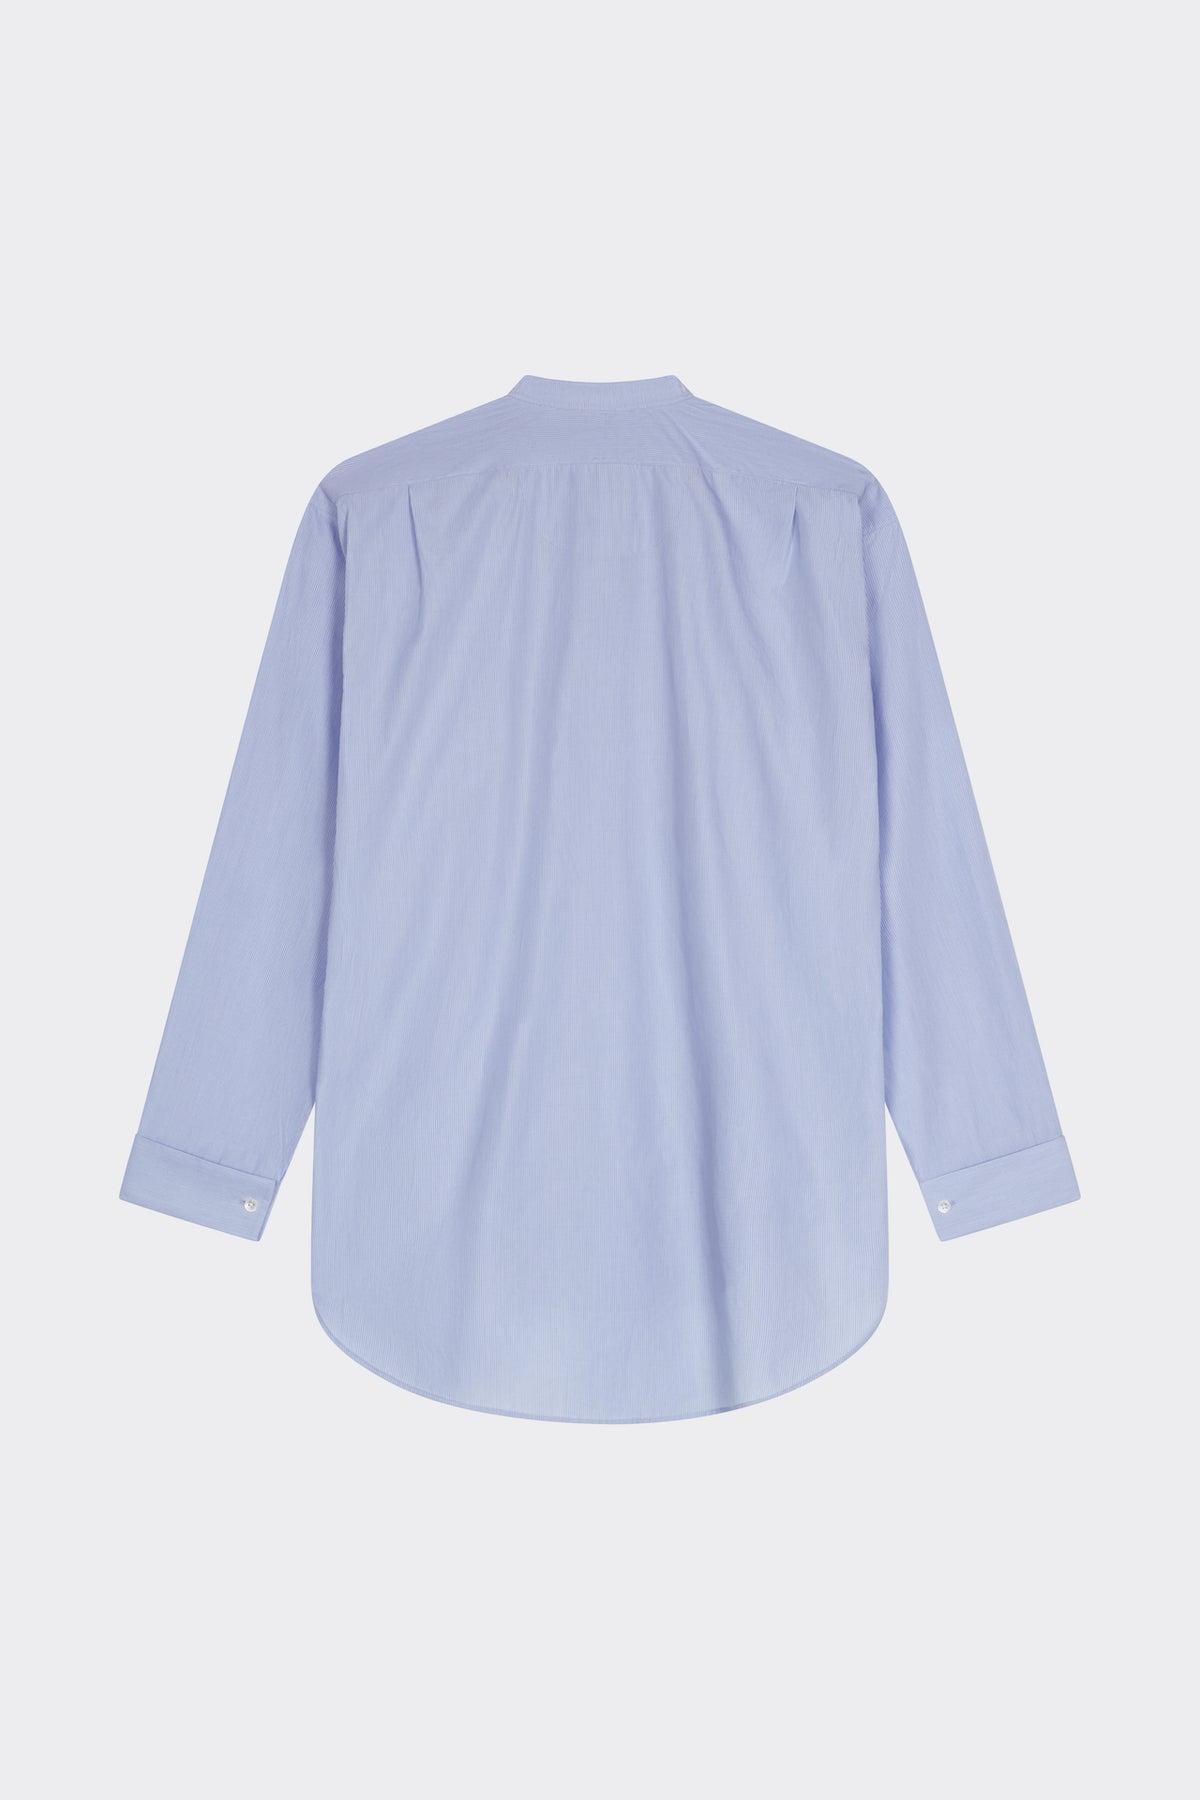 Emilia Shirt in Blue White| Noon by Noor